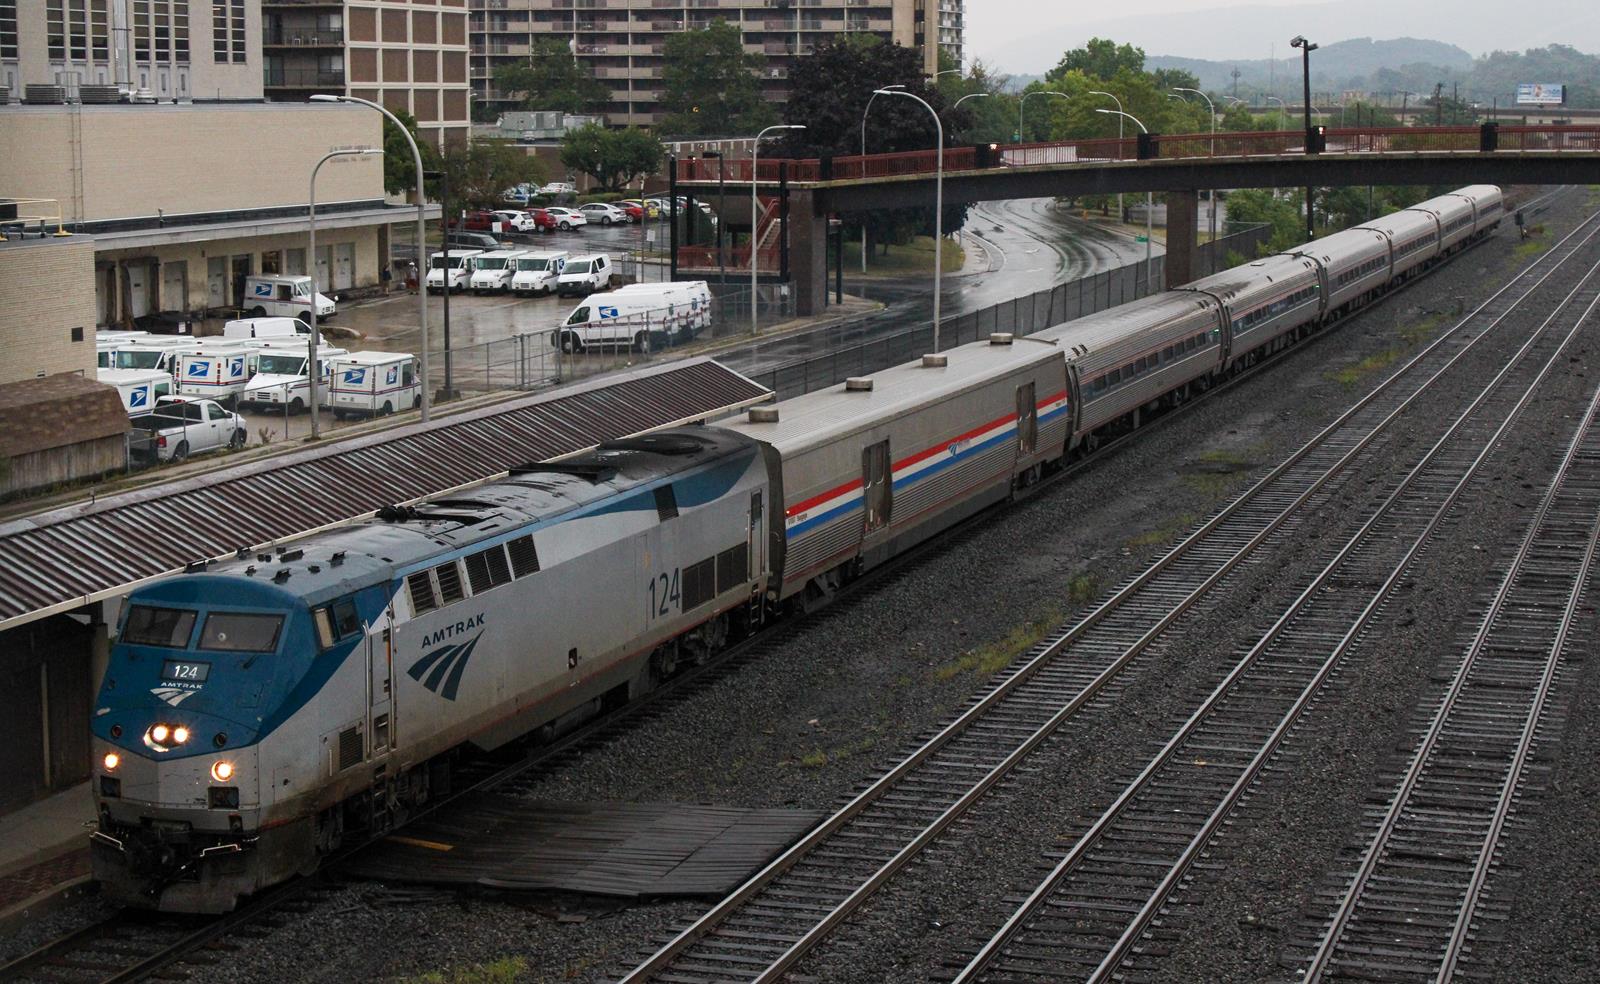 AMTK 124 is a class GE P42DC and  is pictured in Altoona, Pennsylvania, United States.  This was taken along the Allegheny Division on the Amtrak. Photo Copyright: Chris Hall uploaded to Railroad Gallery on 11/22/2022. This photograph of AMTK 124 was taken on Sunday, July 17, 2022. All Rights Reserved. 